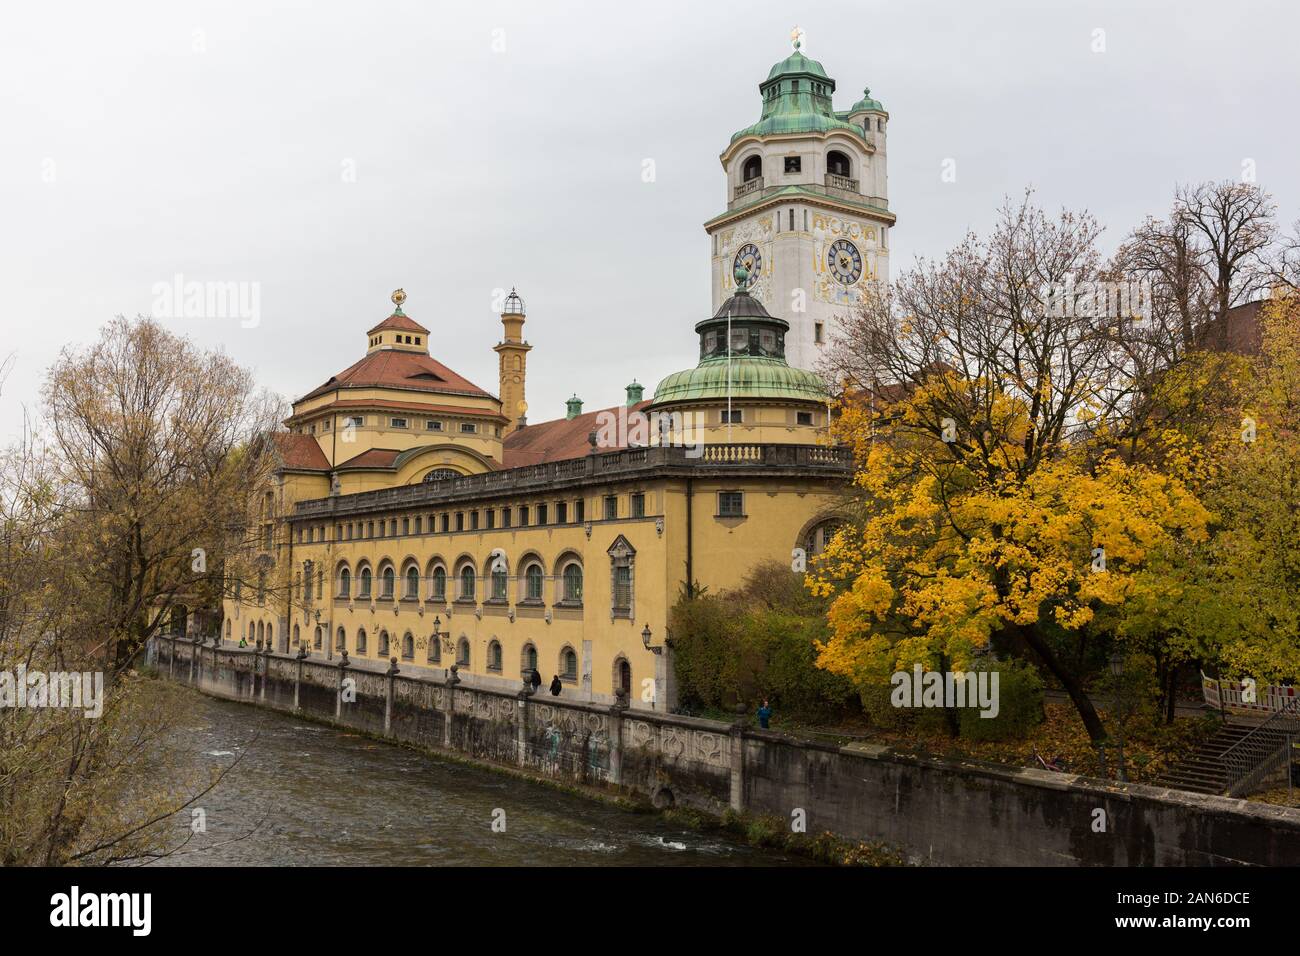 View on 'Müller'sches Volksbad'. Historical bathhouse in the center of Munich. Neo-baroque architecture located at the Isar river. Art nouveau style. Stock Photo